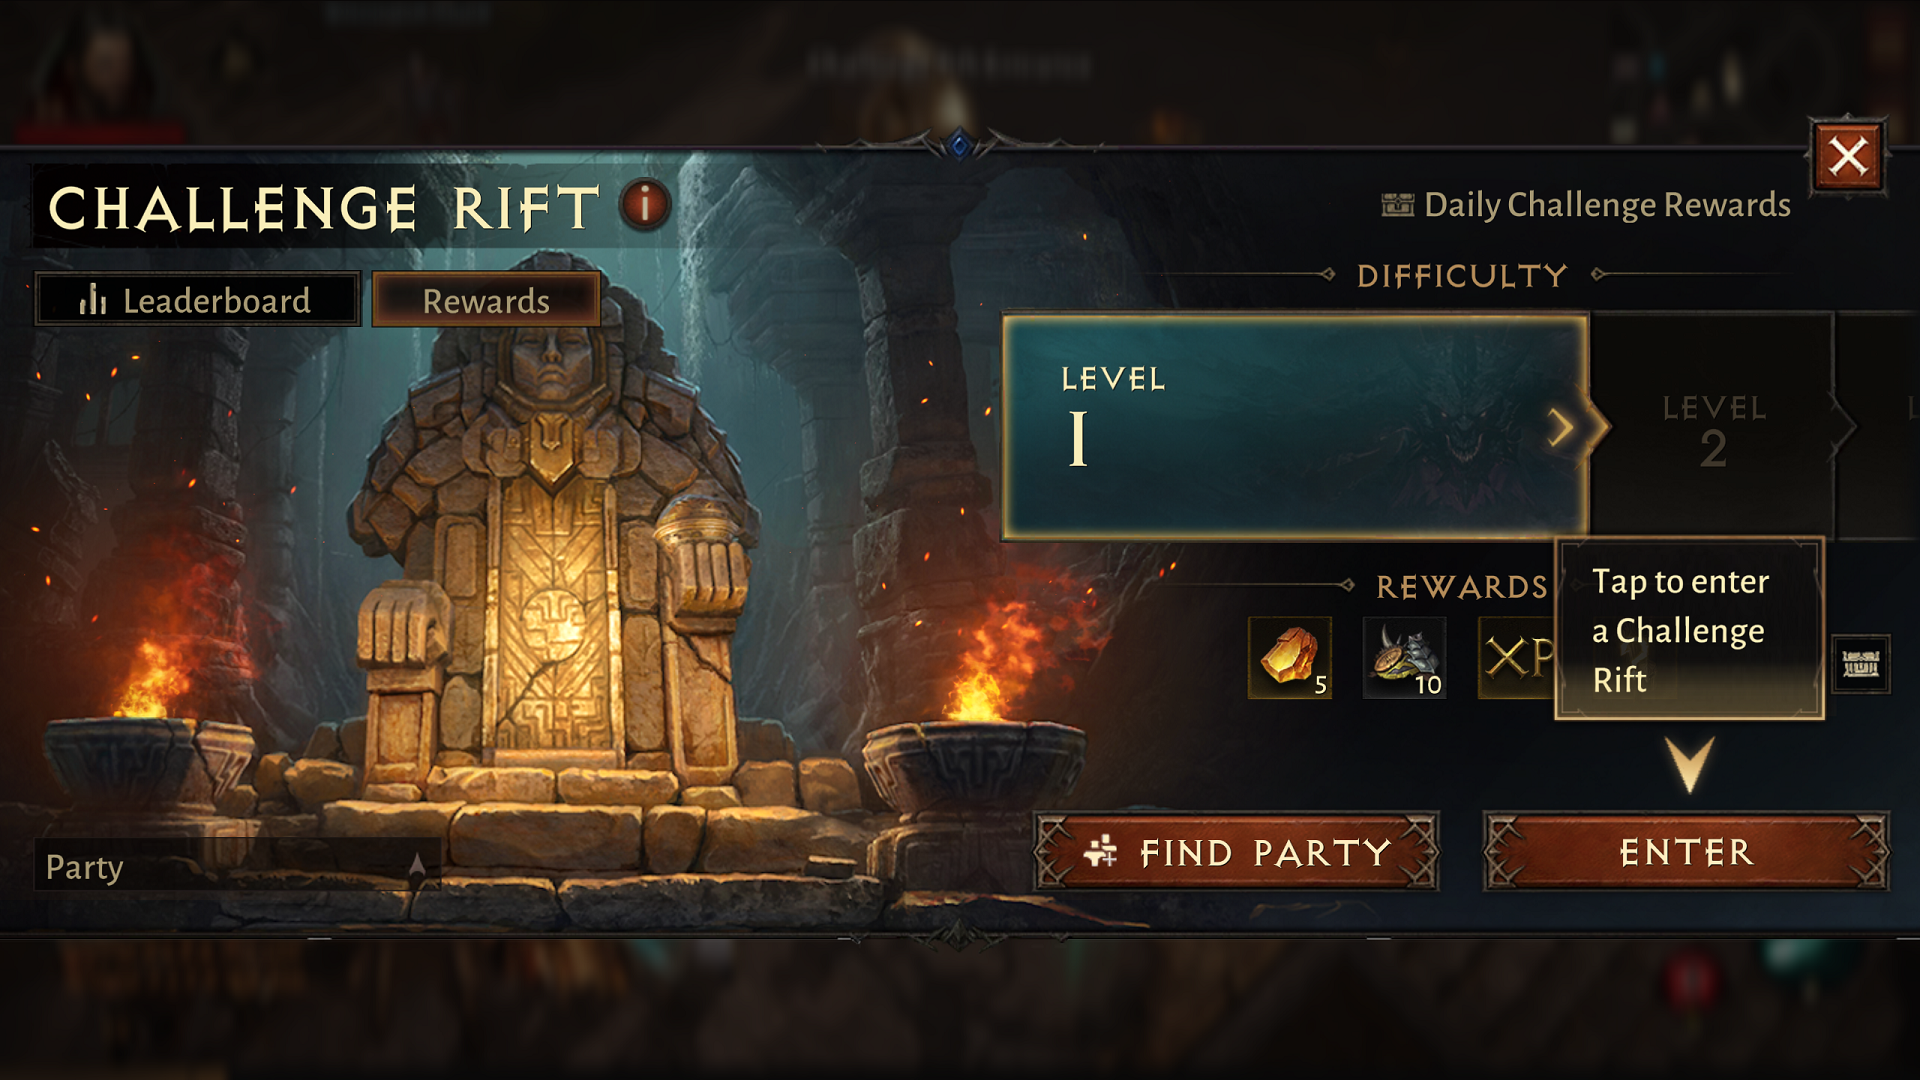 The UI for opening Challenge Rifts in Diablo Immortal